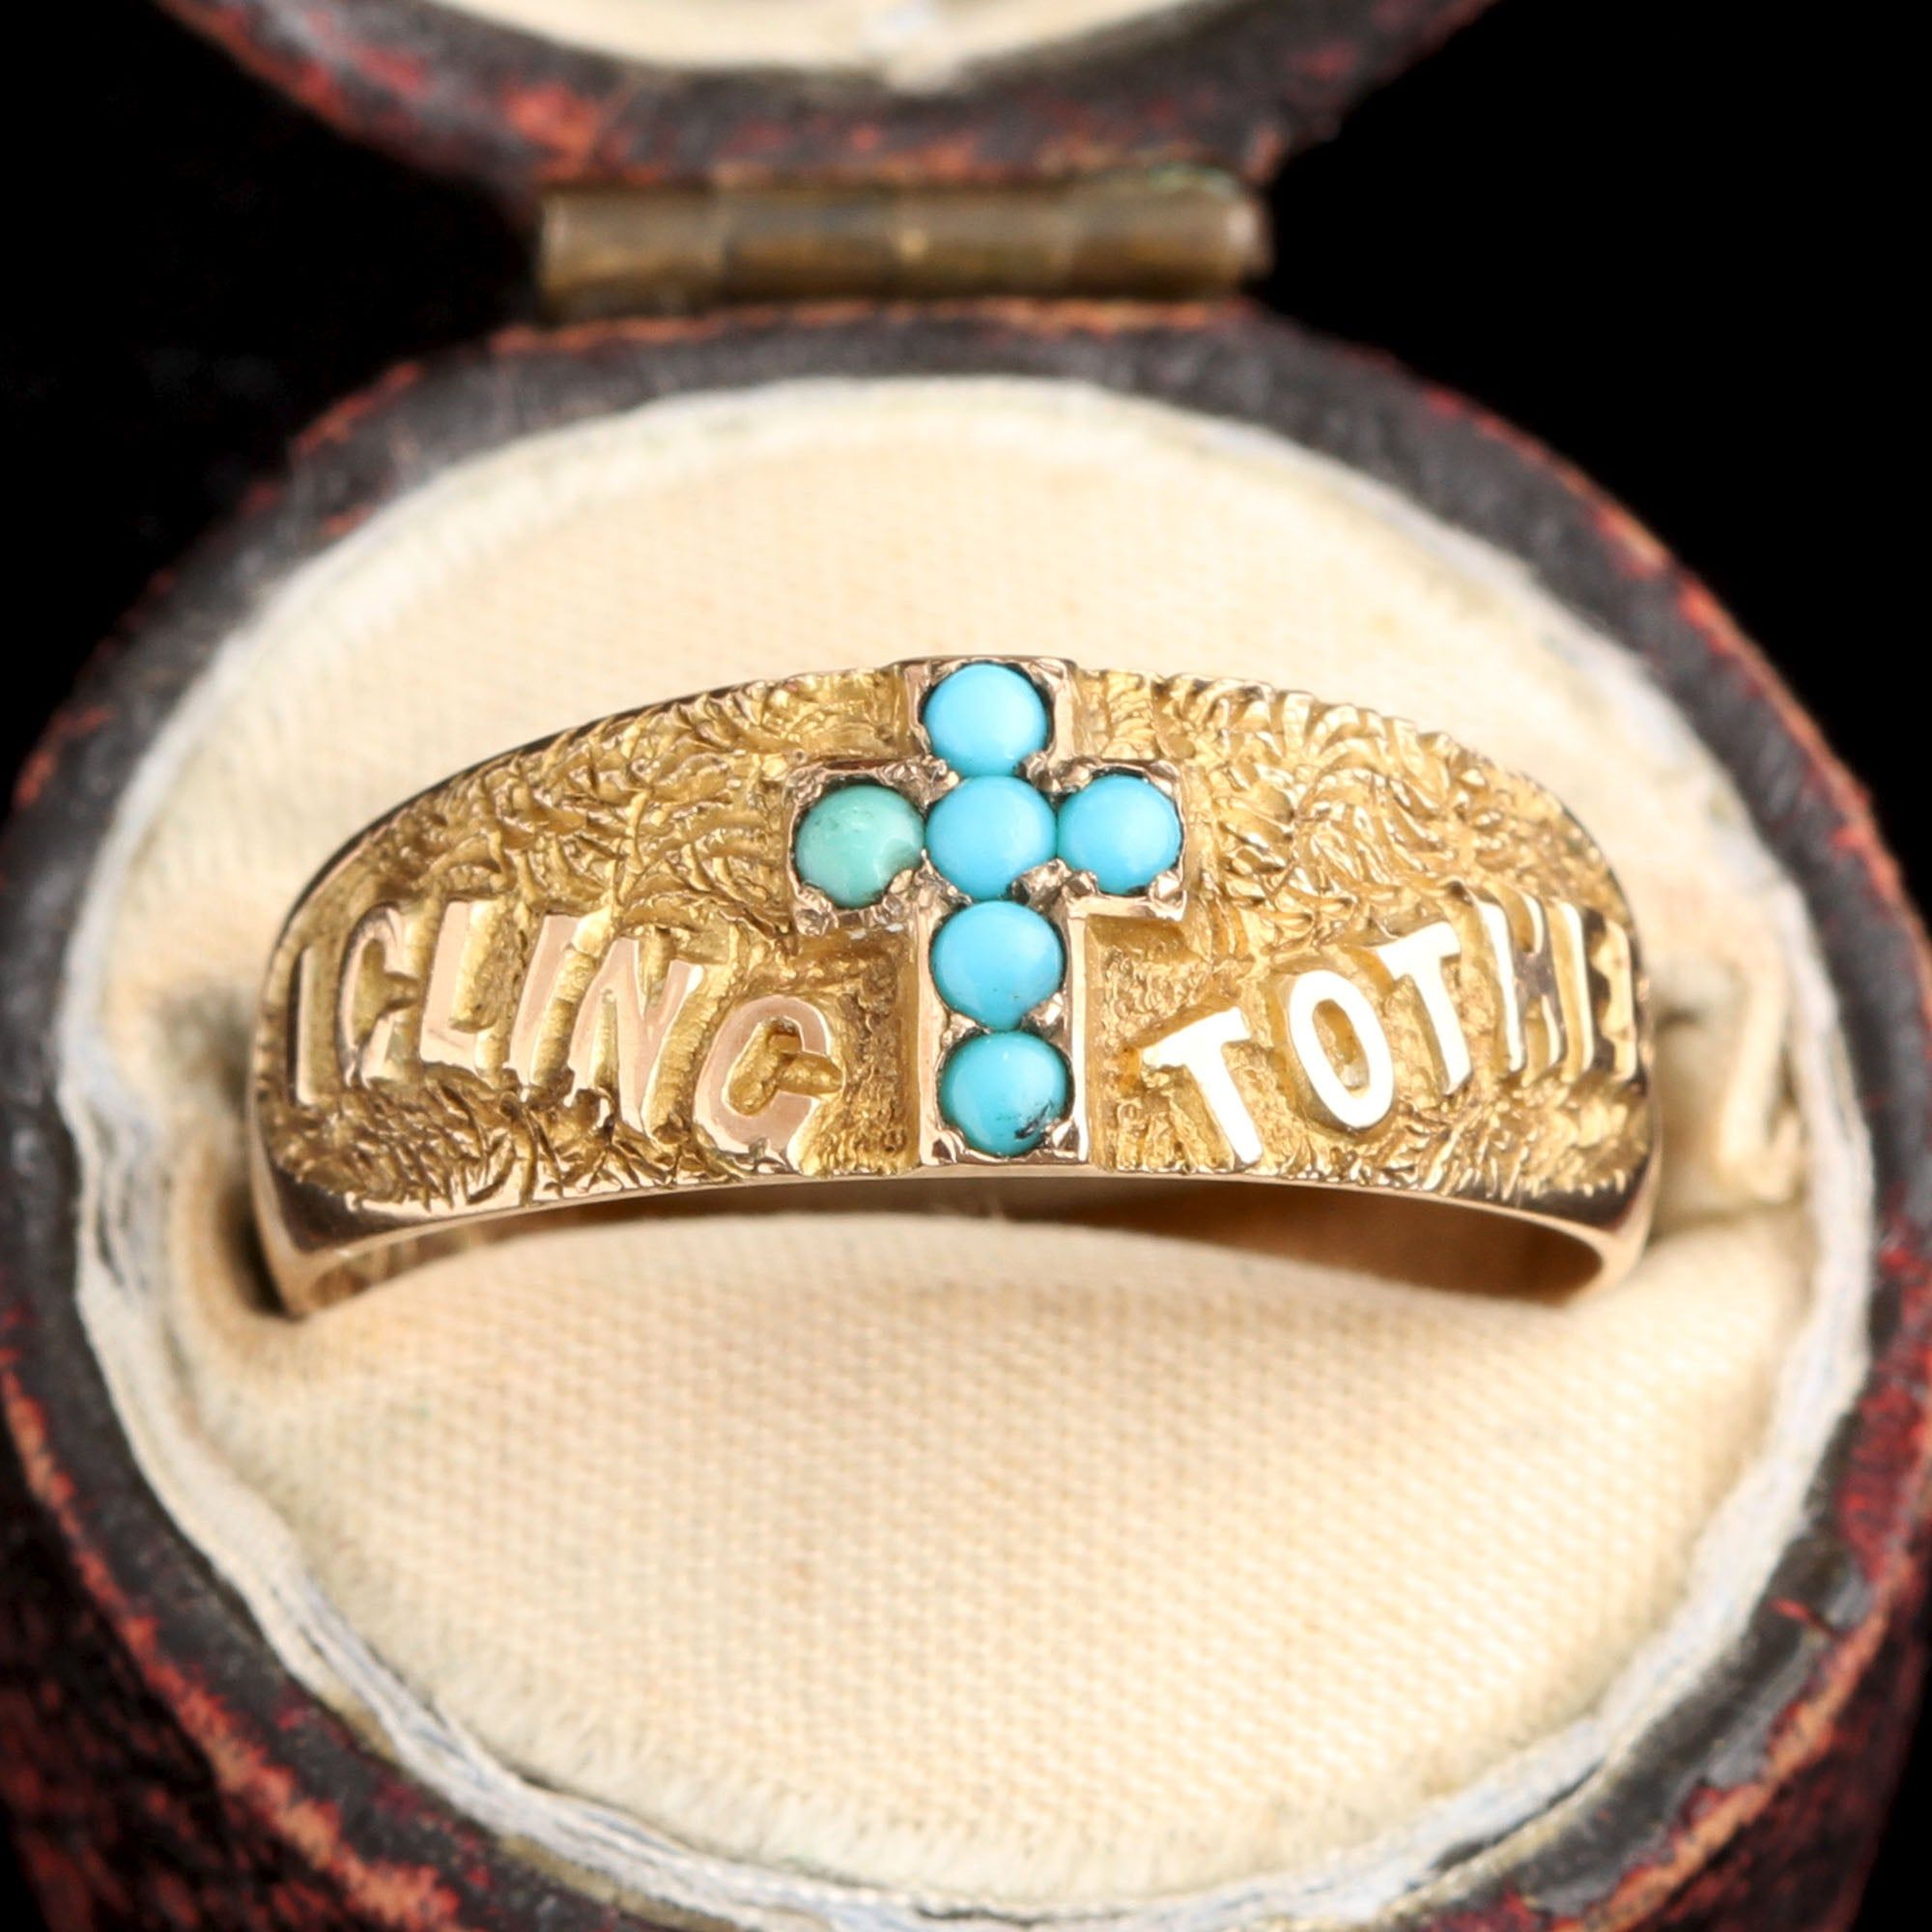 Edwardian "I Cling to Thee" Cross Ring